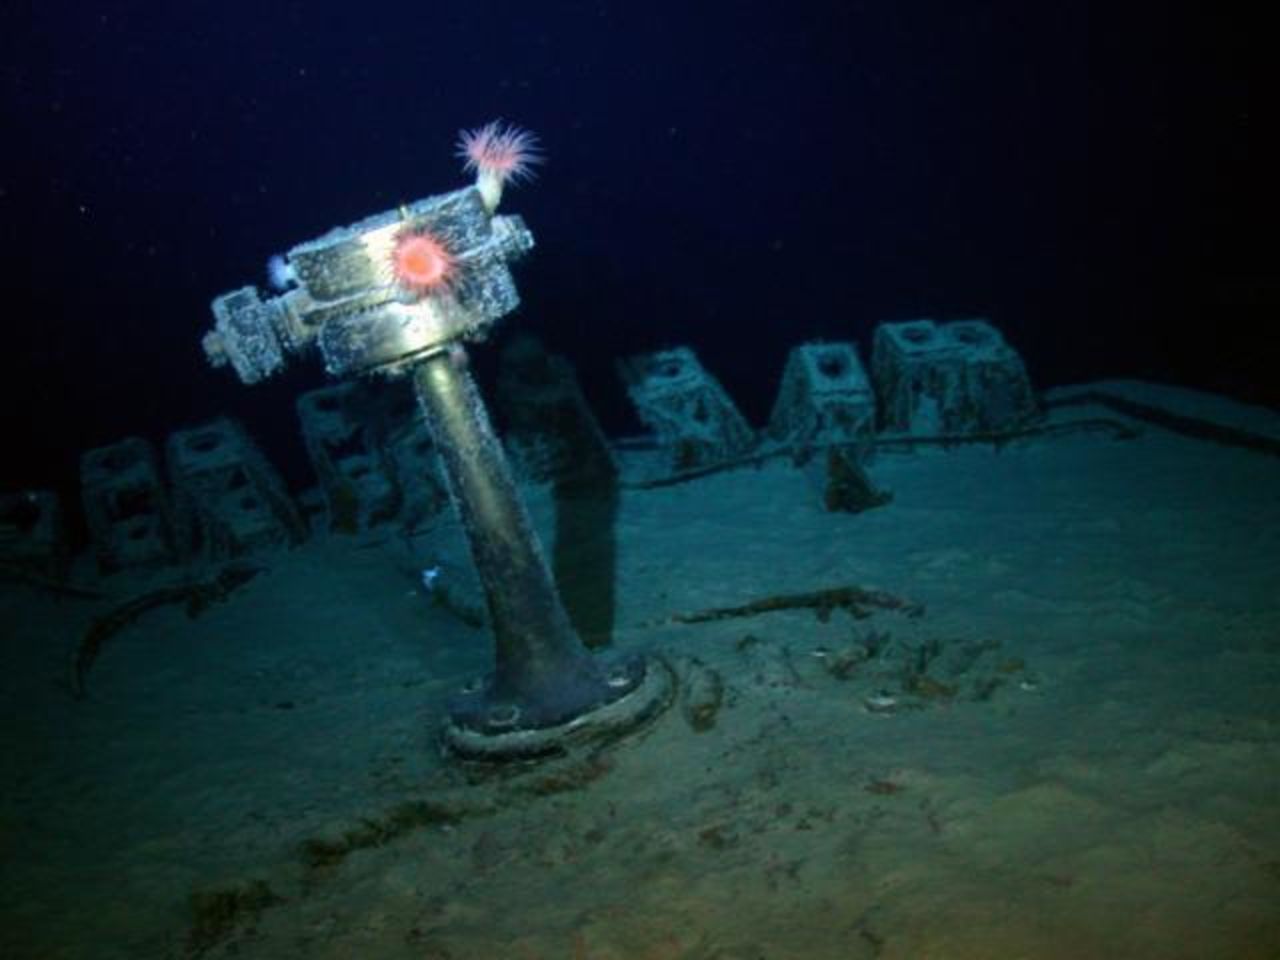 The SS Gairsoppa was discovered 300 miles off the coast of Ireland by underwater archaeolgy experts from Odyssey Marine Exploration.